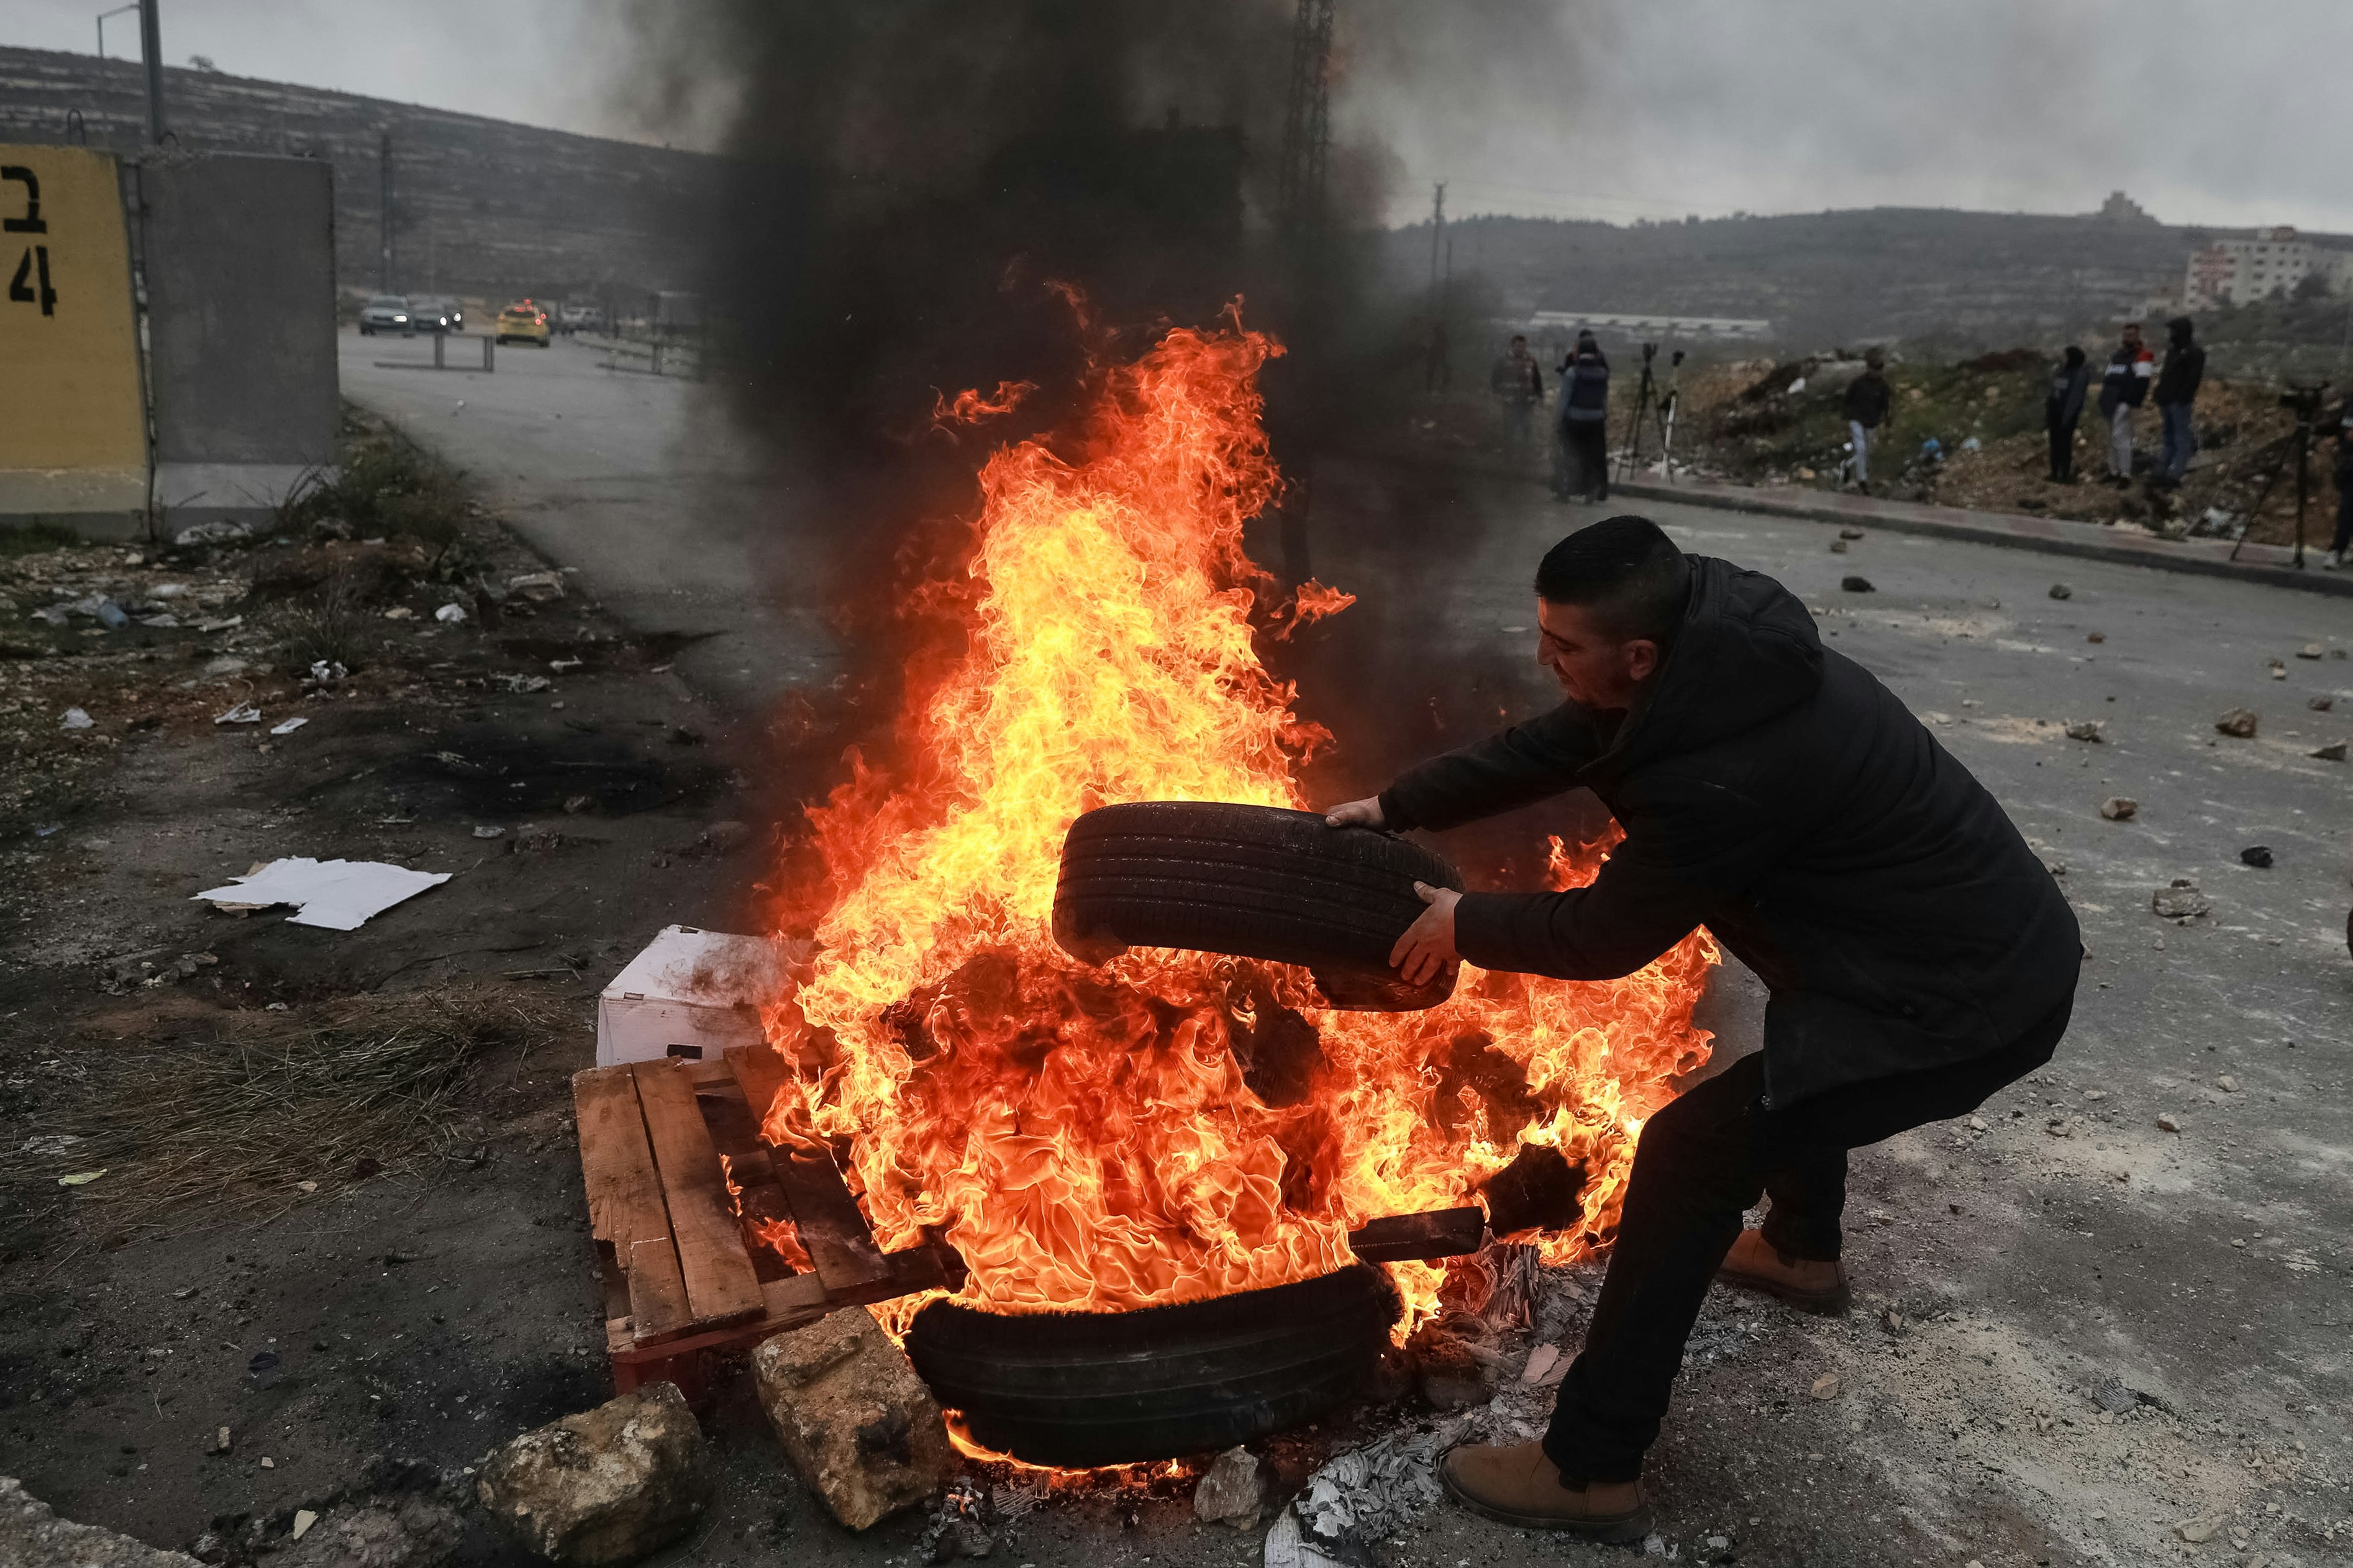 RAMALLAH, WEST BANK - FEBRUARY 09: A group of Palestinians burn tyres during a protest to show react death of three Palestinians named Ashraf Mubaslat, Adham Mabrouka and Mohammad Dakhil killed as a result of shooting of Israeli forces to their vehicle in Nablus, on February 09, 2022 in Ramallah, West Bank. (Photo by Issam Rimawi/Anadolu Agency via Getty Images)